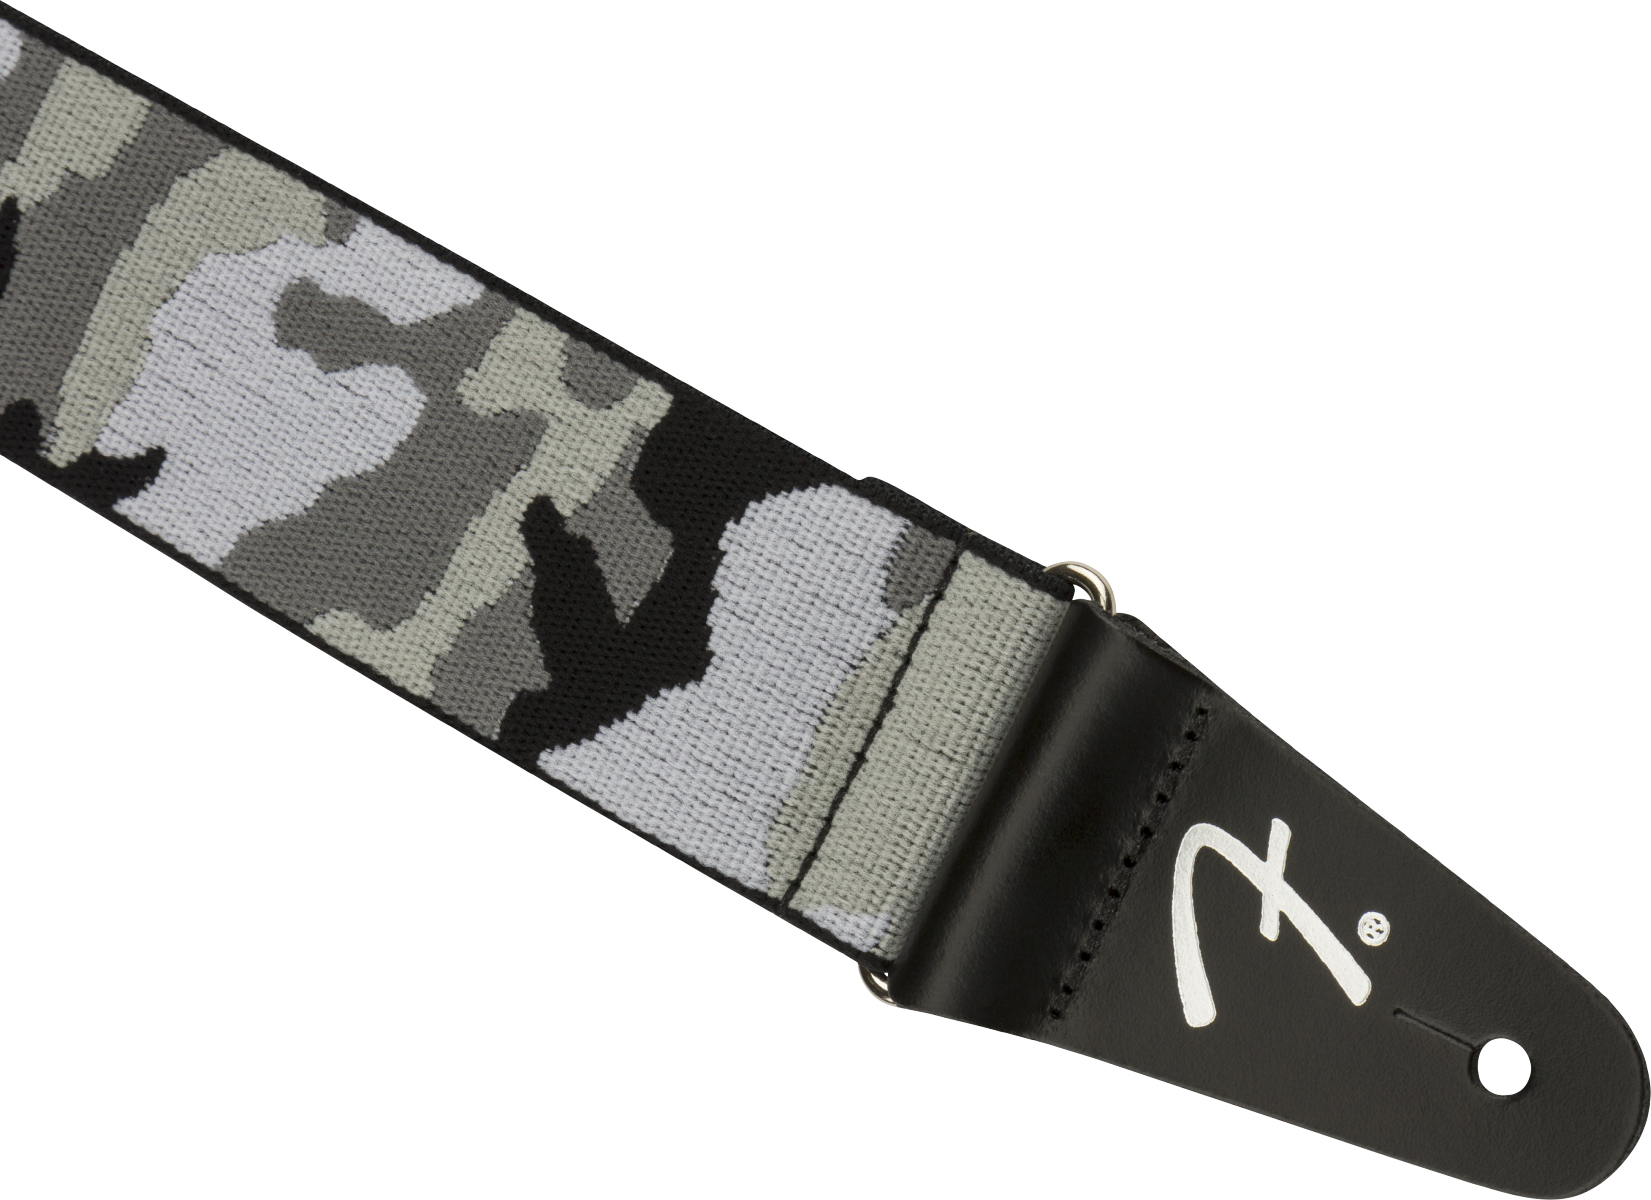 Fender Weighless 2 Inches Camo Guitar Strap Gray - Sangle Courroie - Variation 1